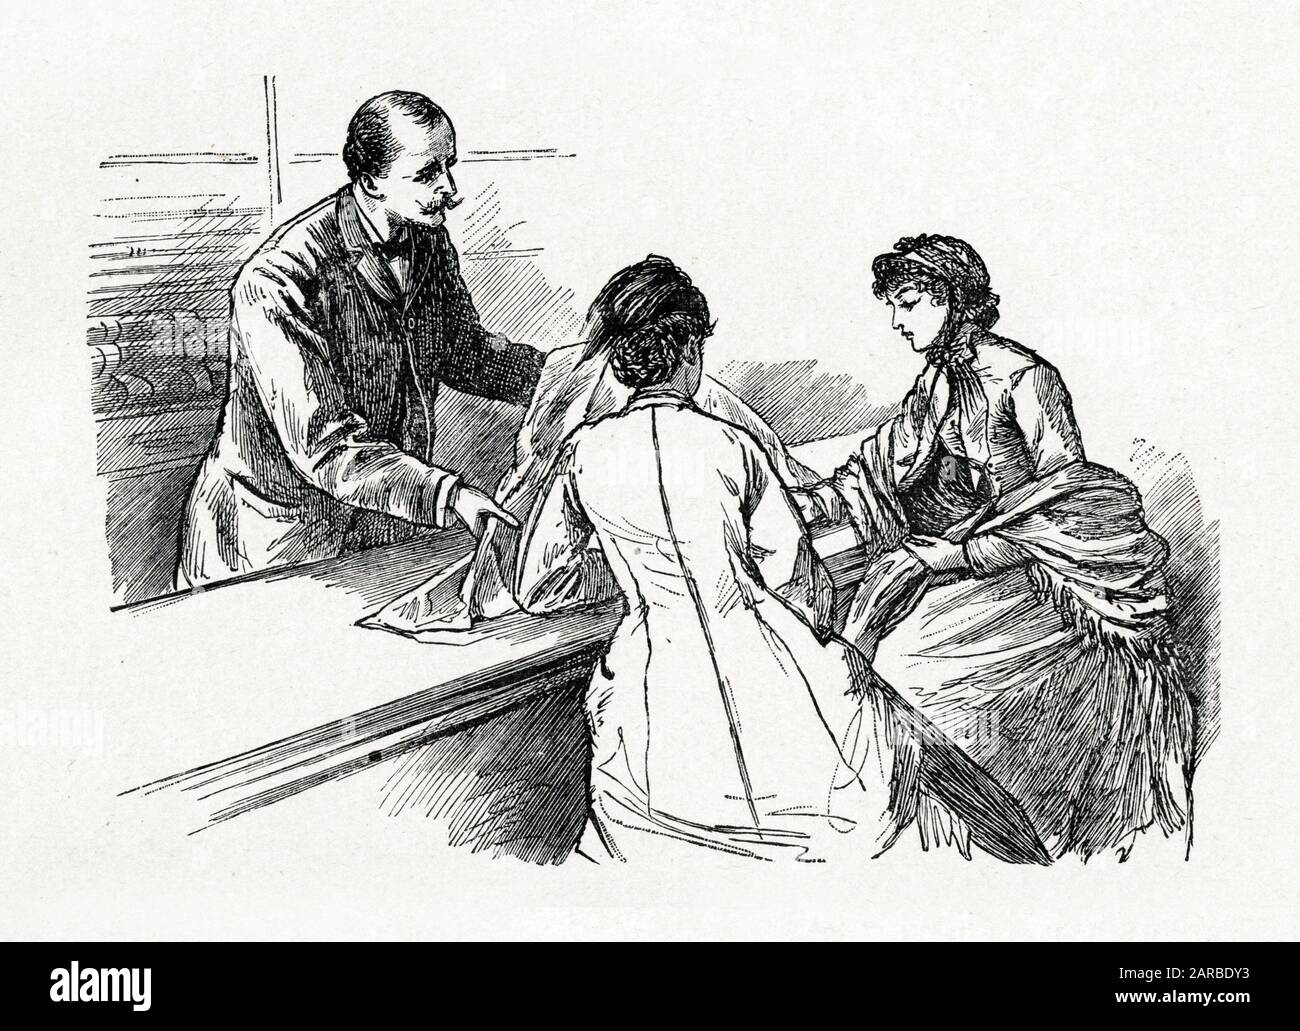 'Little Women' by Louisa May Alcott - Meg buying silk for a new dress, far beyond her household budget, encouraged by her friend Sallie.      Date: 1880 Stock Photo